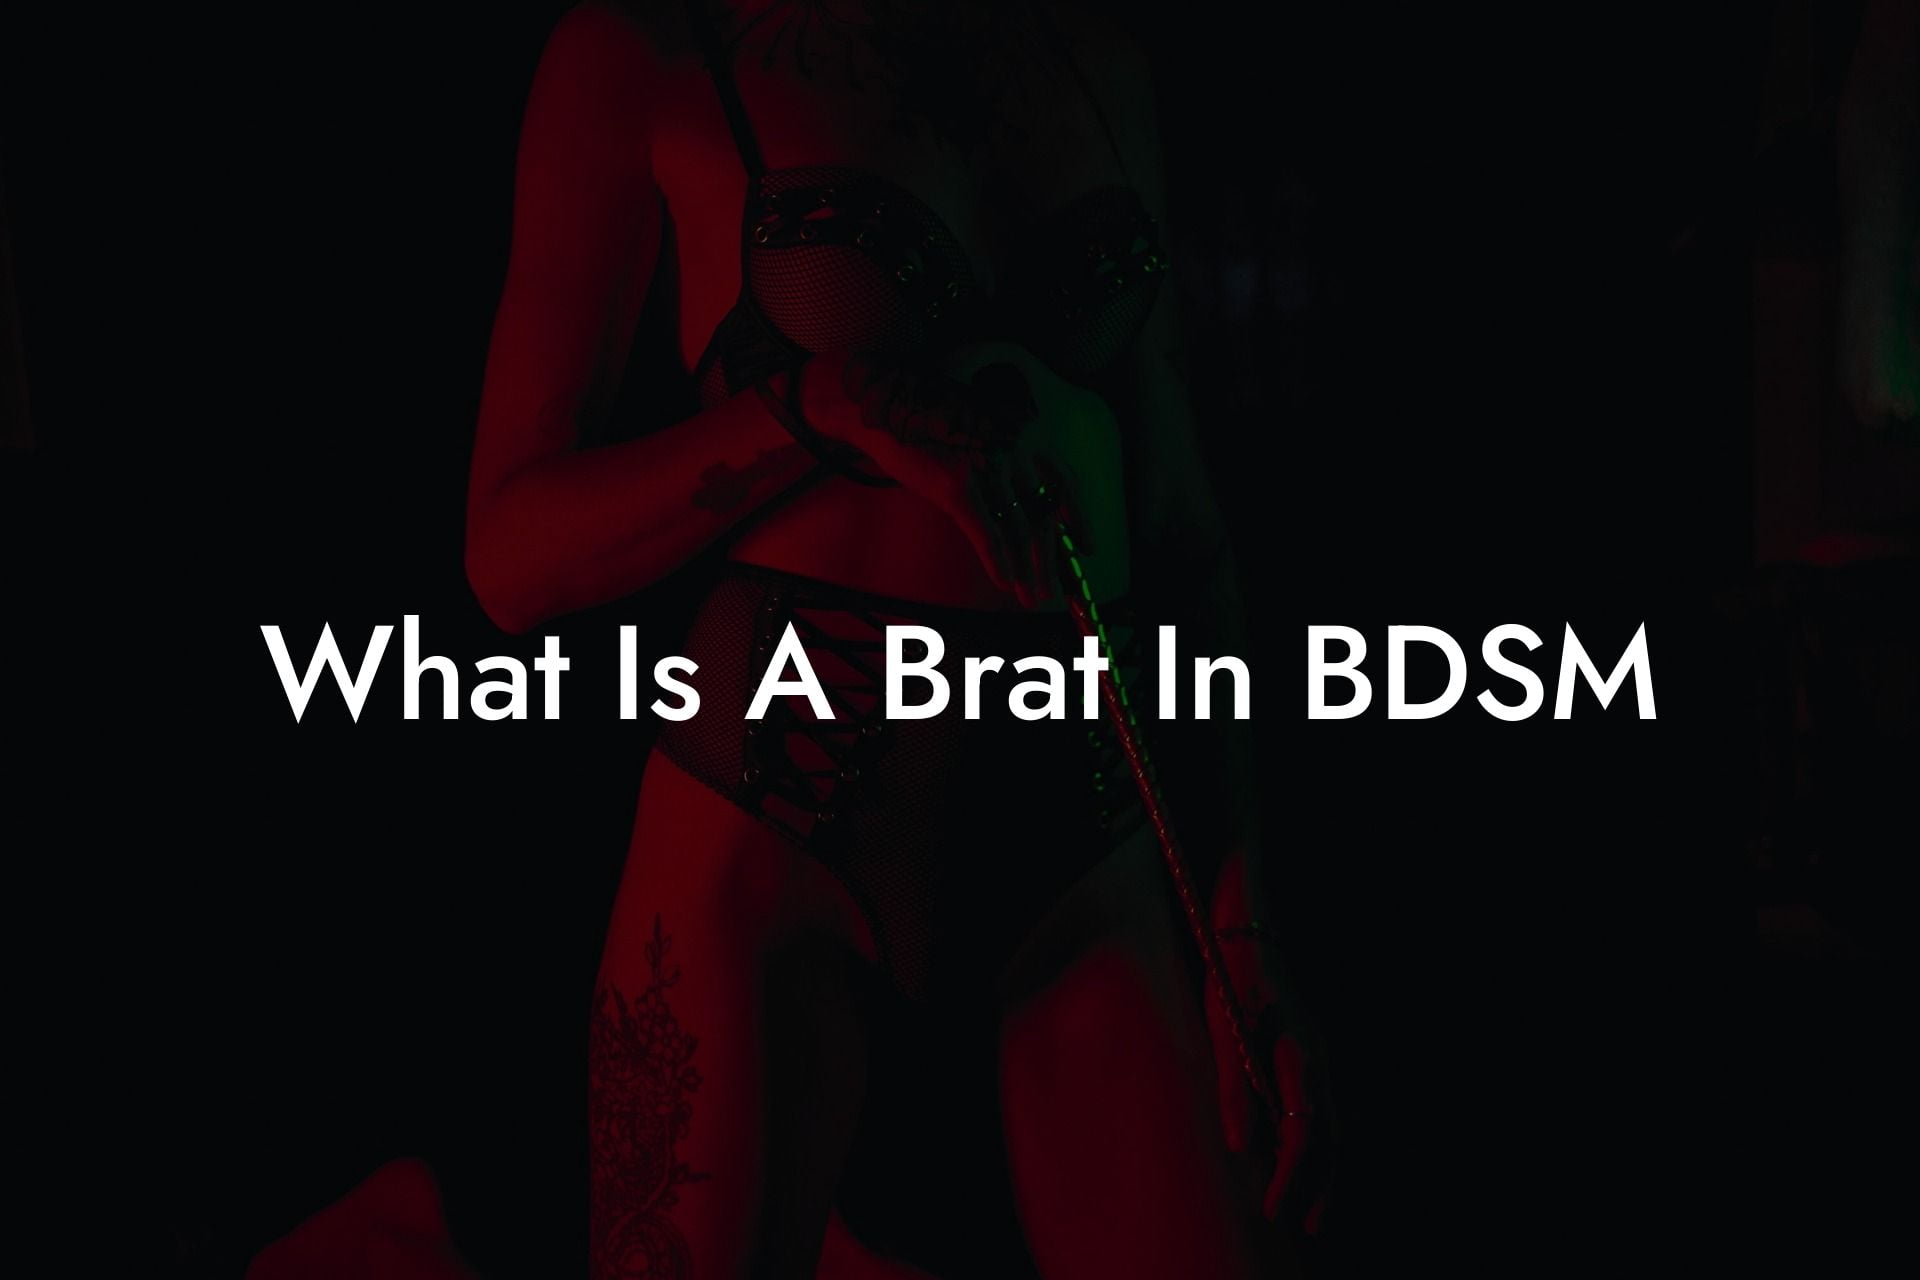 What Is A Brat In BDSM